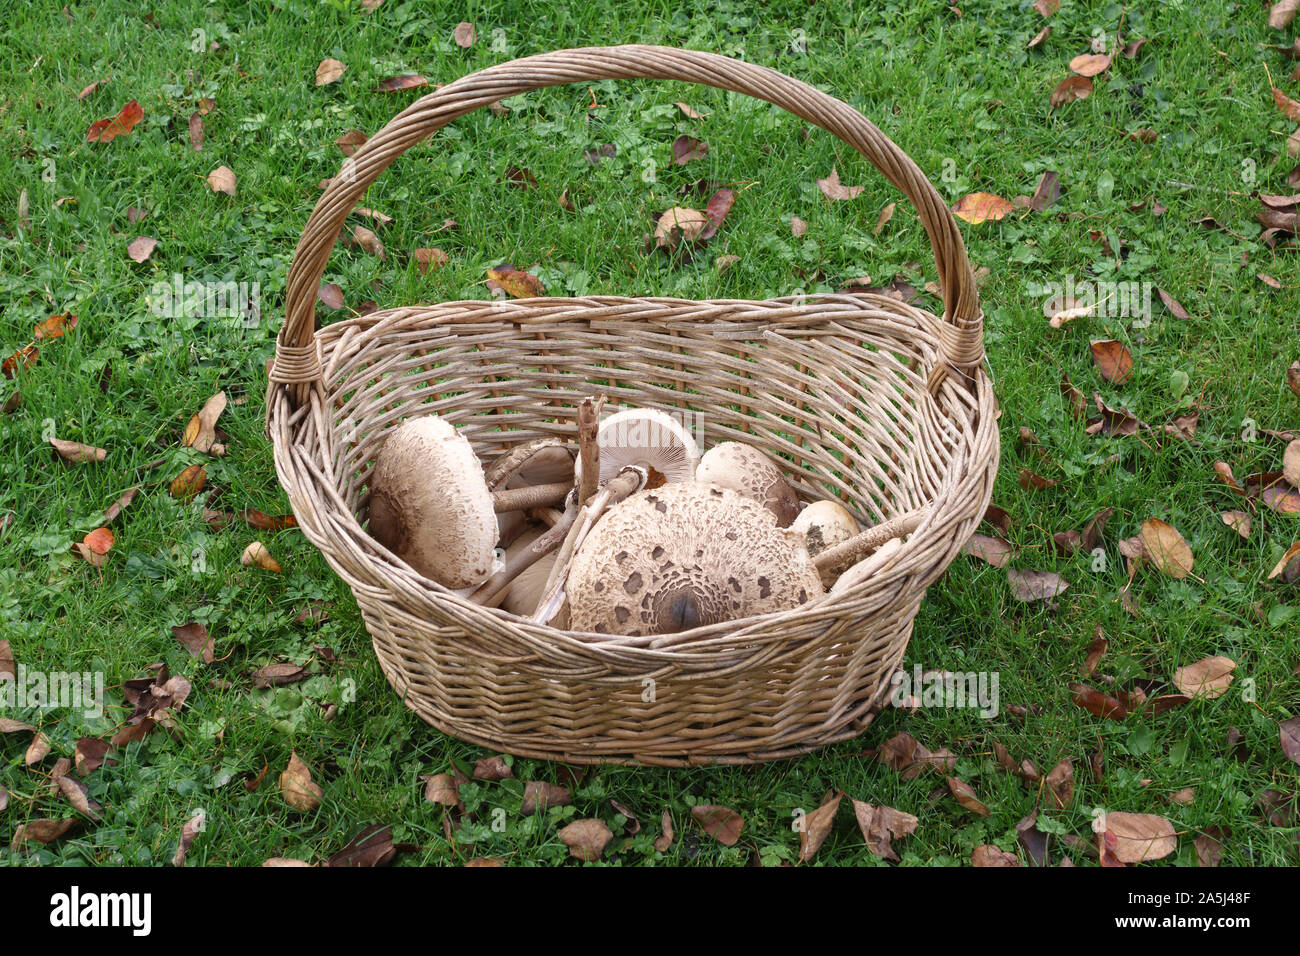 Herefordshire, UK. A basket of freshly picked parasol mushrooms (Macrolepiota procera), fairly common across Britain in late summer and autumn Stock Photo